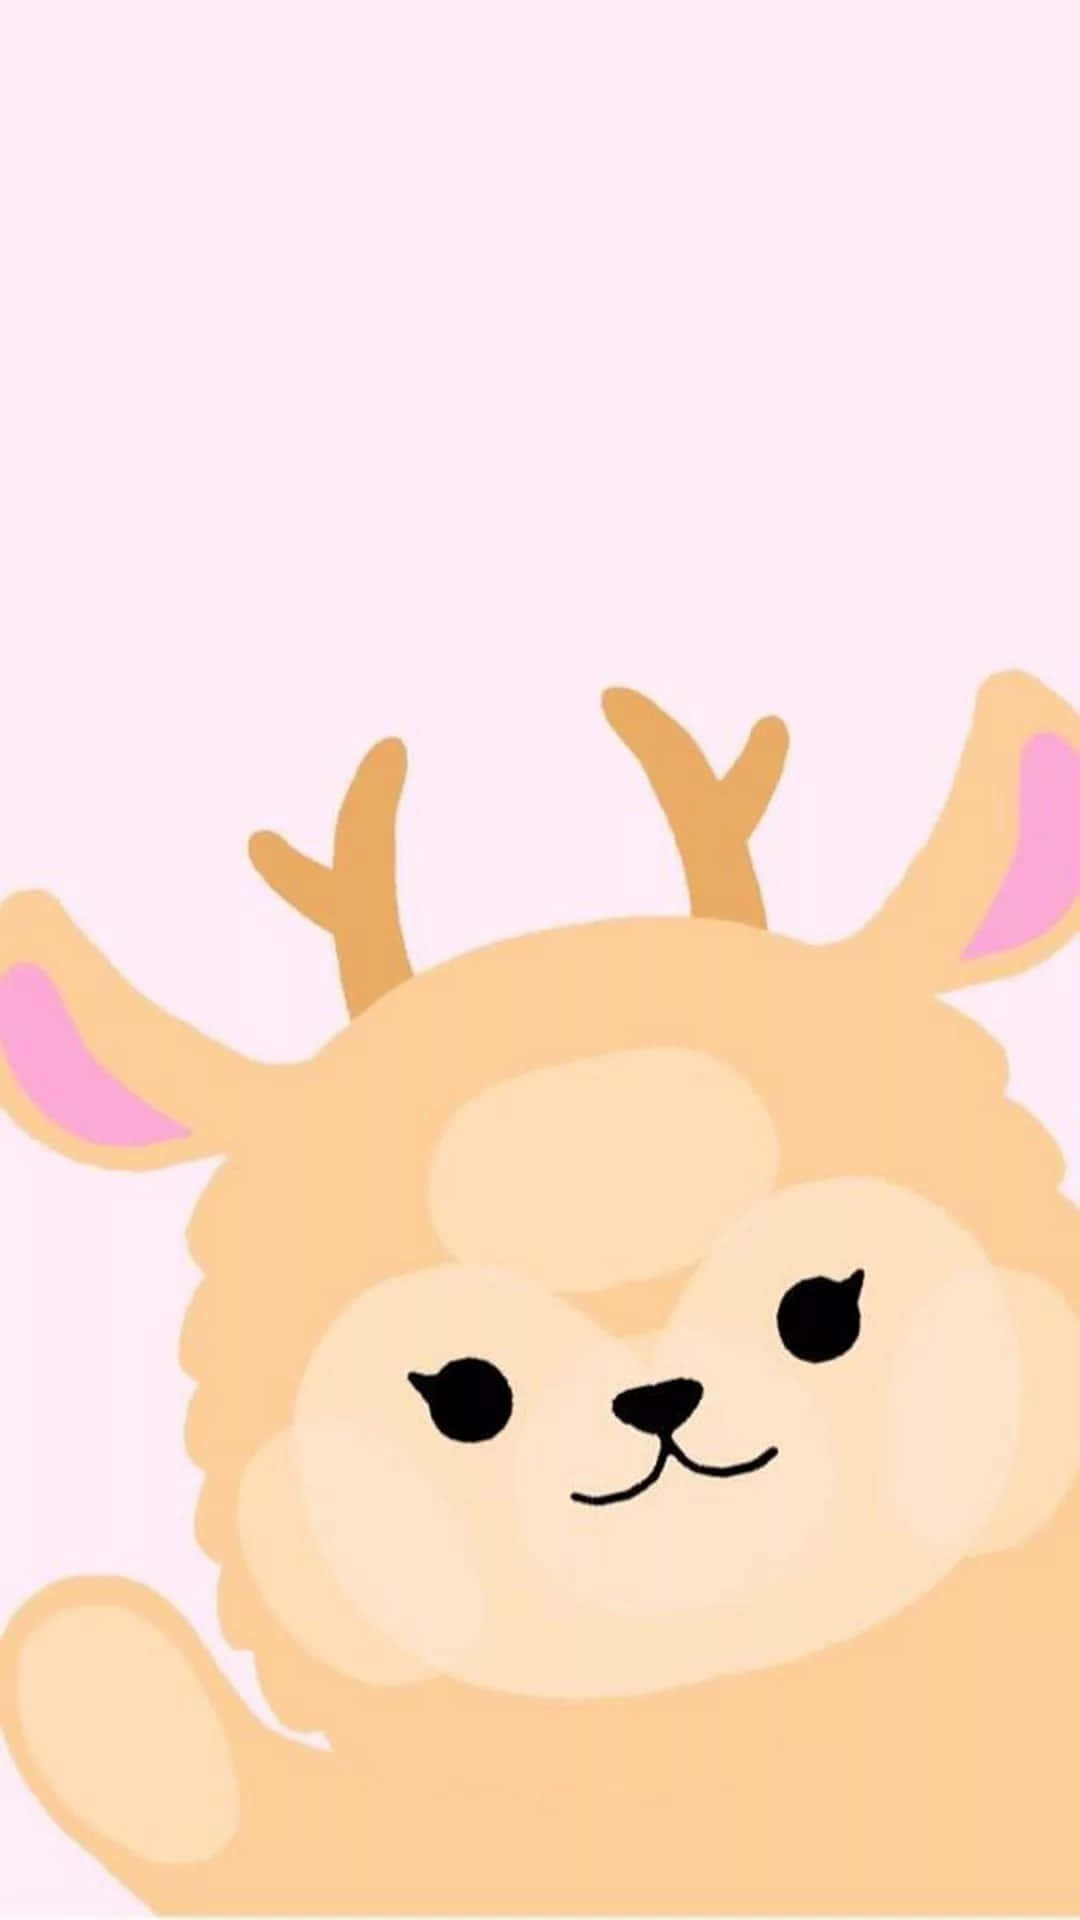 A Cute Llama With Horns On A Pink Background Wallpaper